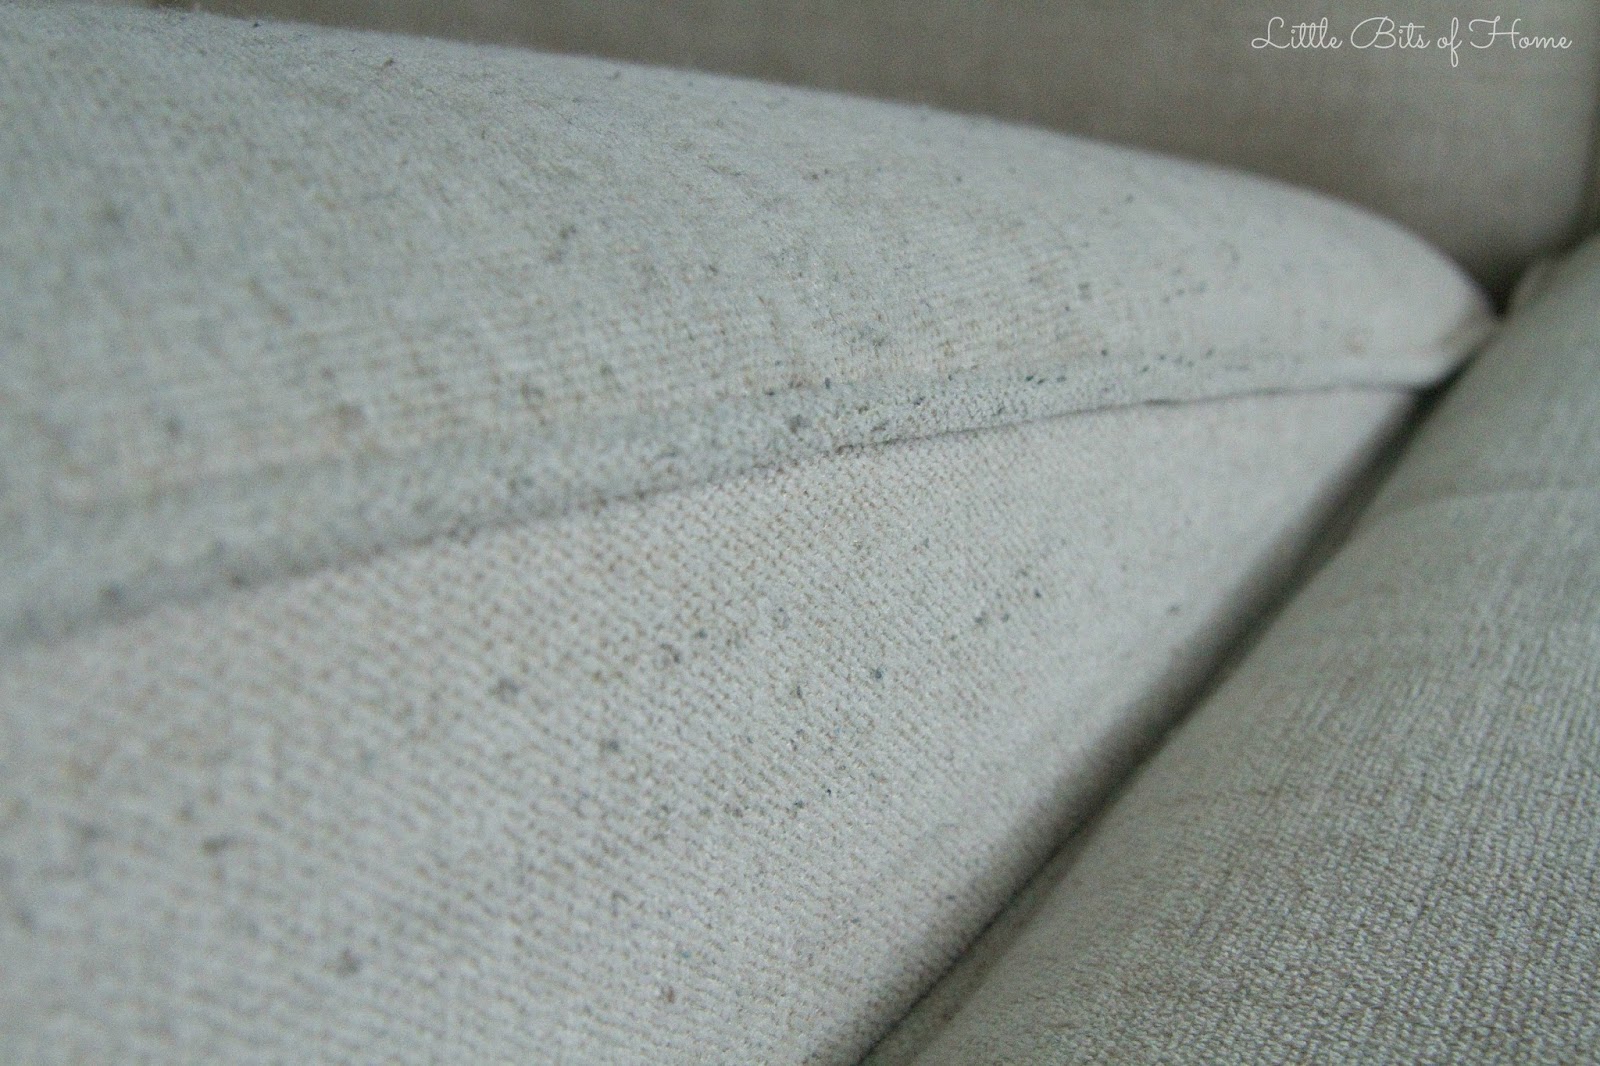 HOW TO FIX PULLS OR SNAGS IN YOUR FURNITURE UPHOLSTERY FABRIC